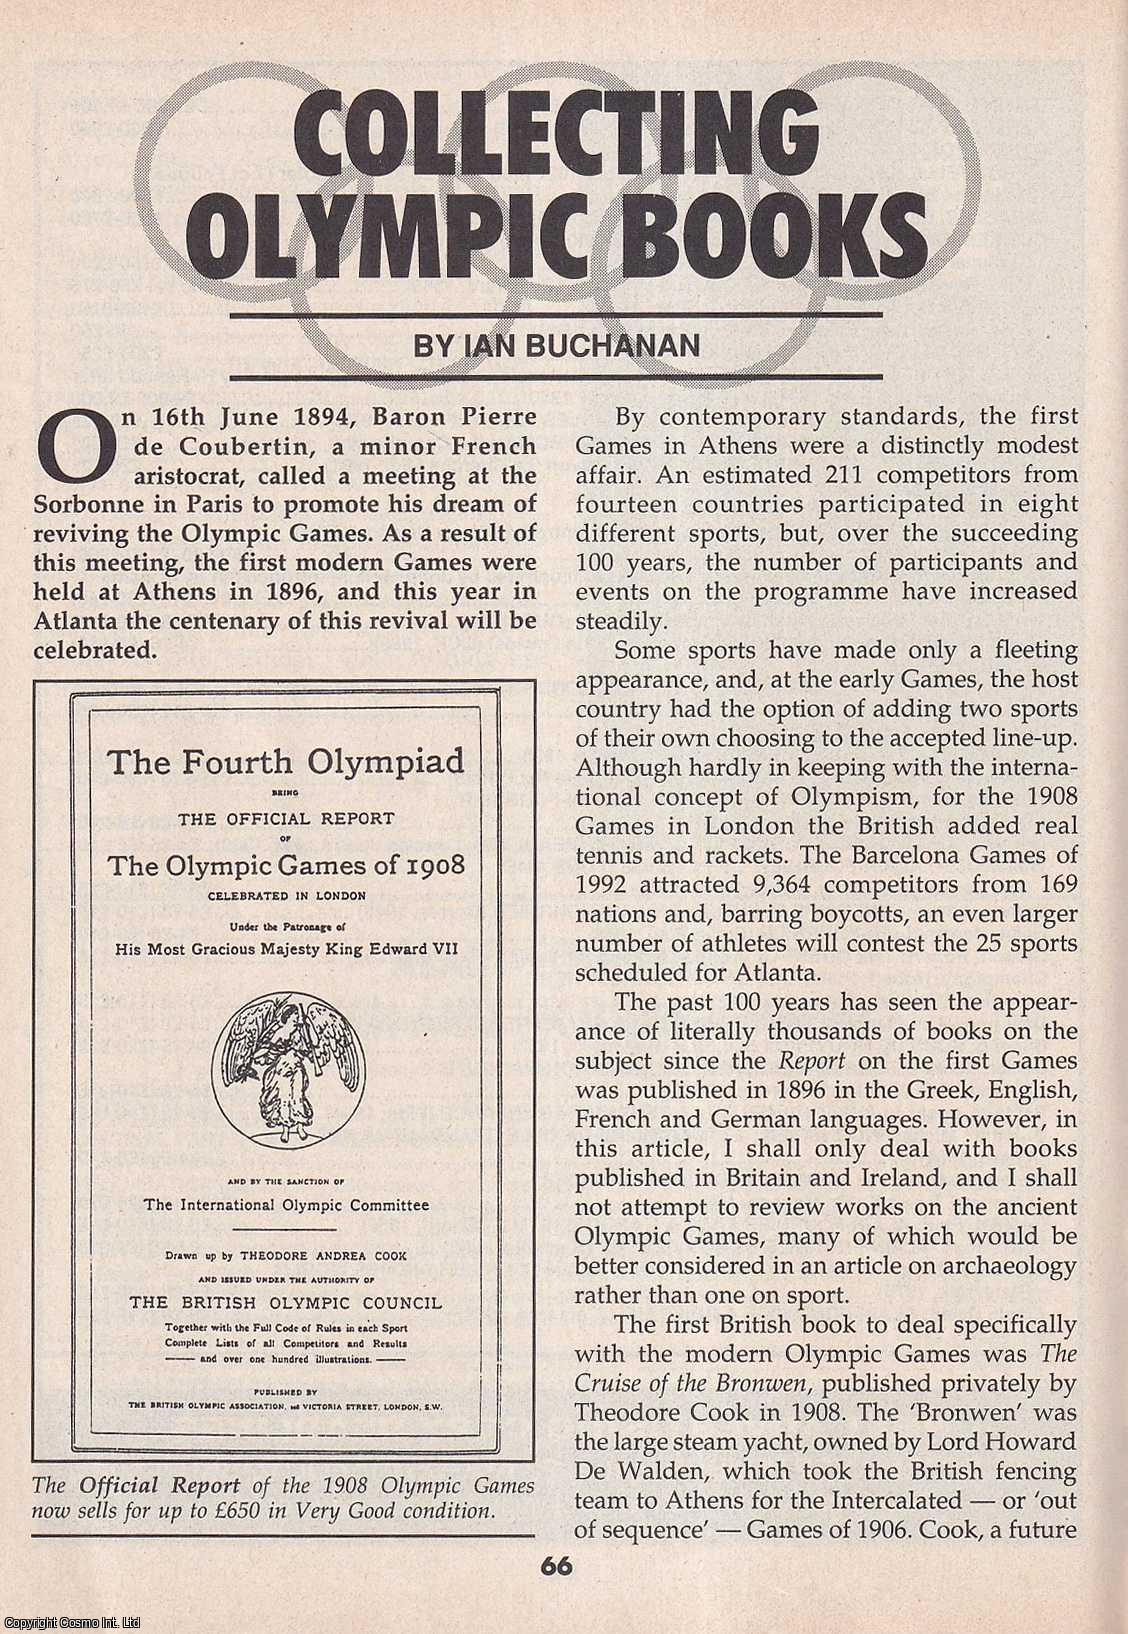 Ian Buchanan - Collecting Olympic Books. This is an original article separated from an issue of The Book & Magazine Collector publication.